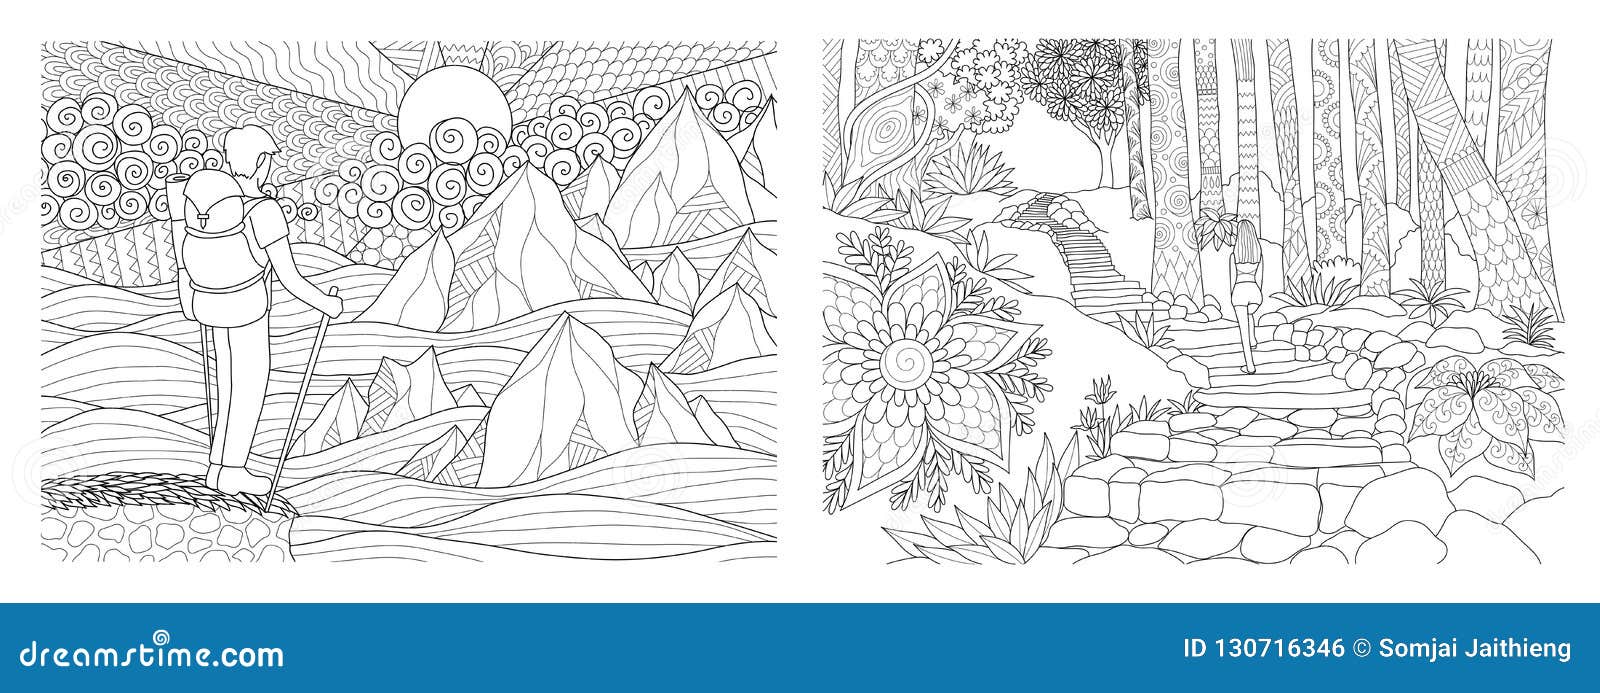 Nature Trees Coloring Pages Stock Illustrations – 20 Nature Trees ...